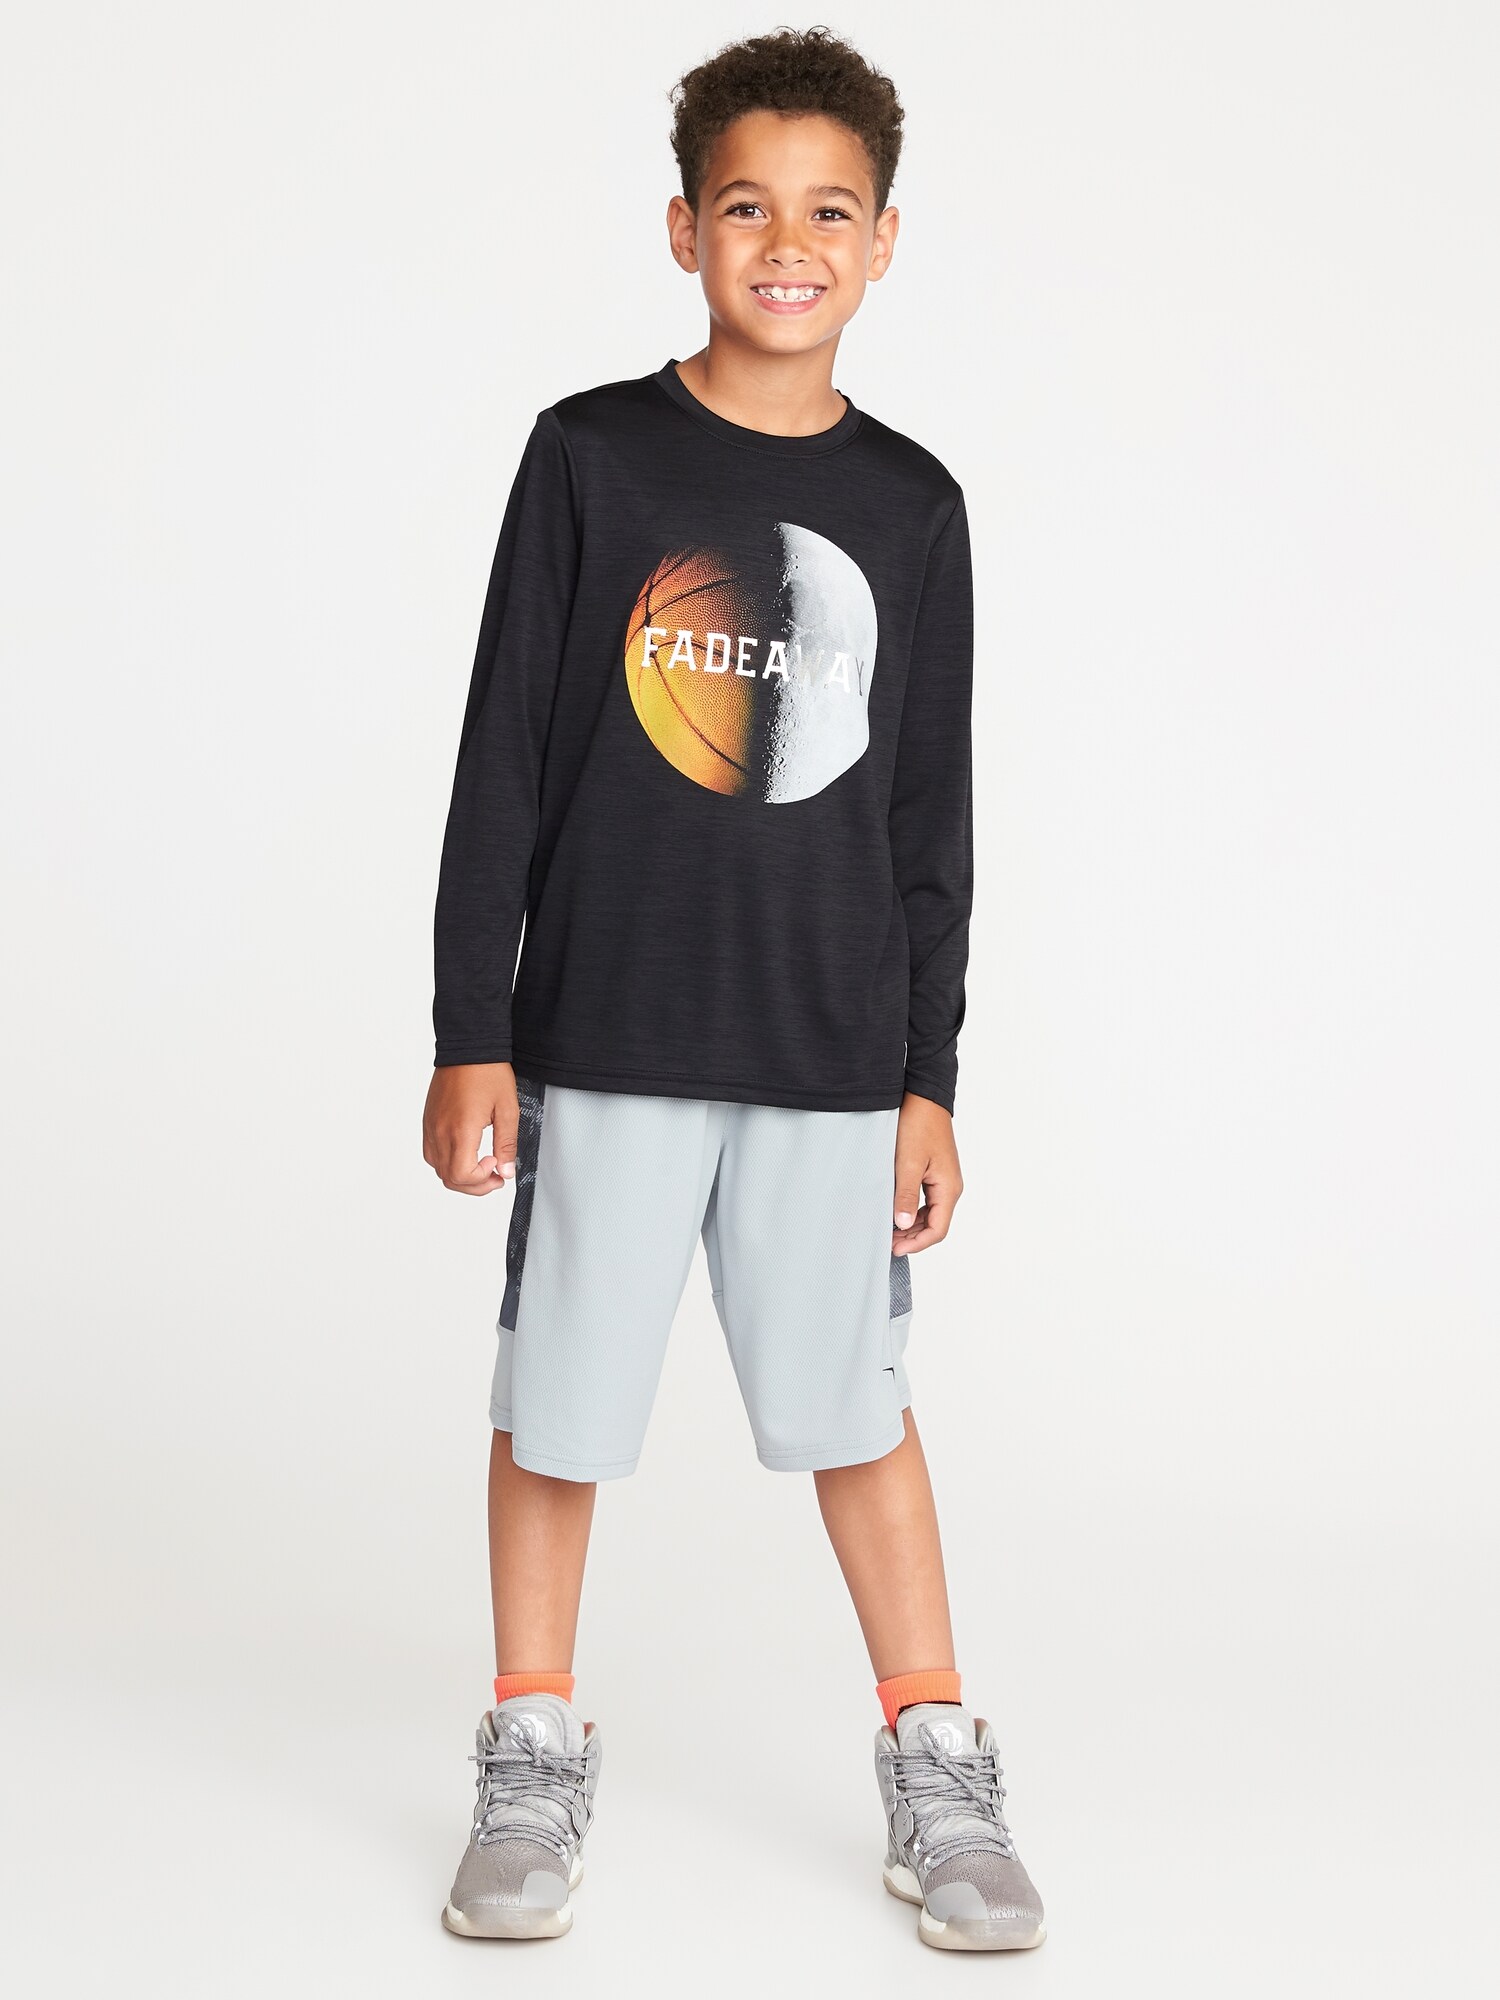 Go-Dry Graphic Performance Tee For Boys | Old Navy